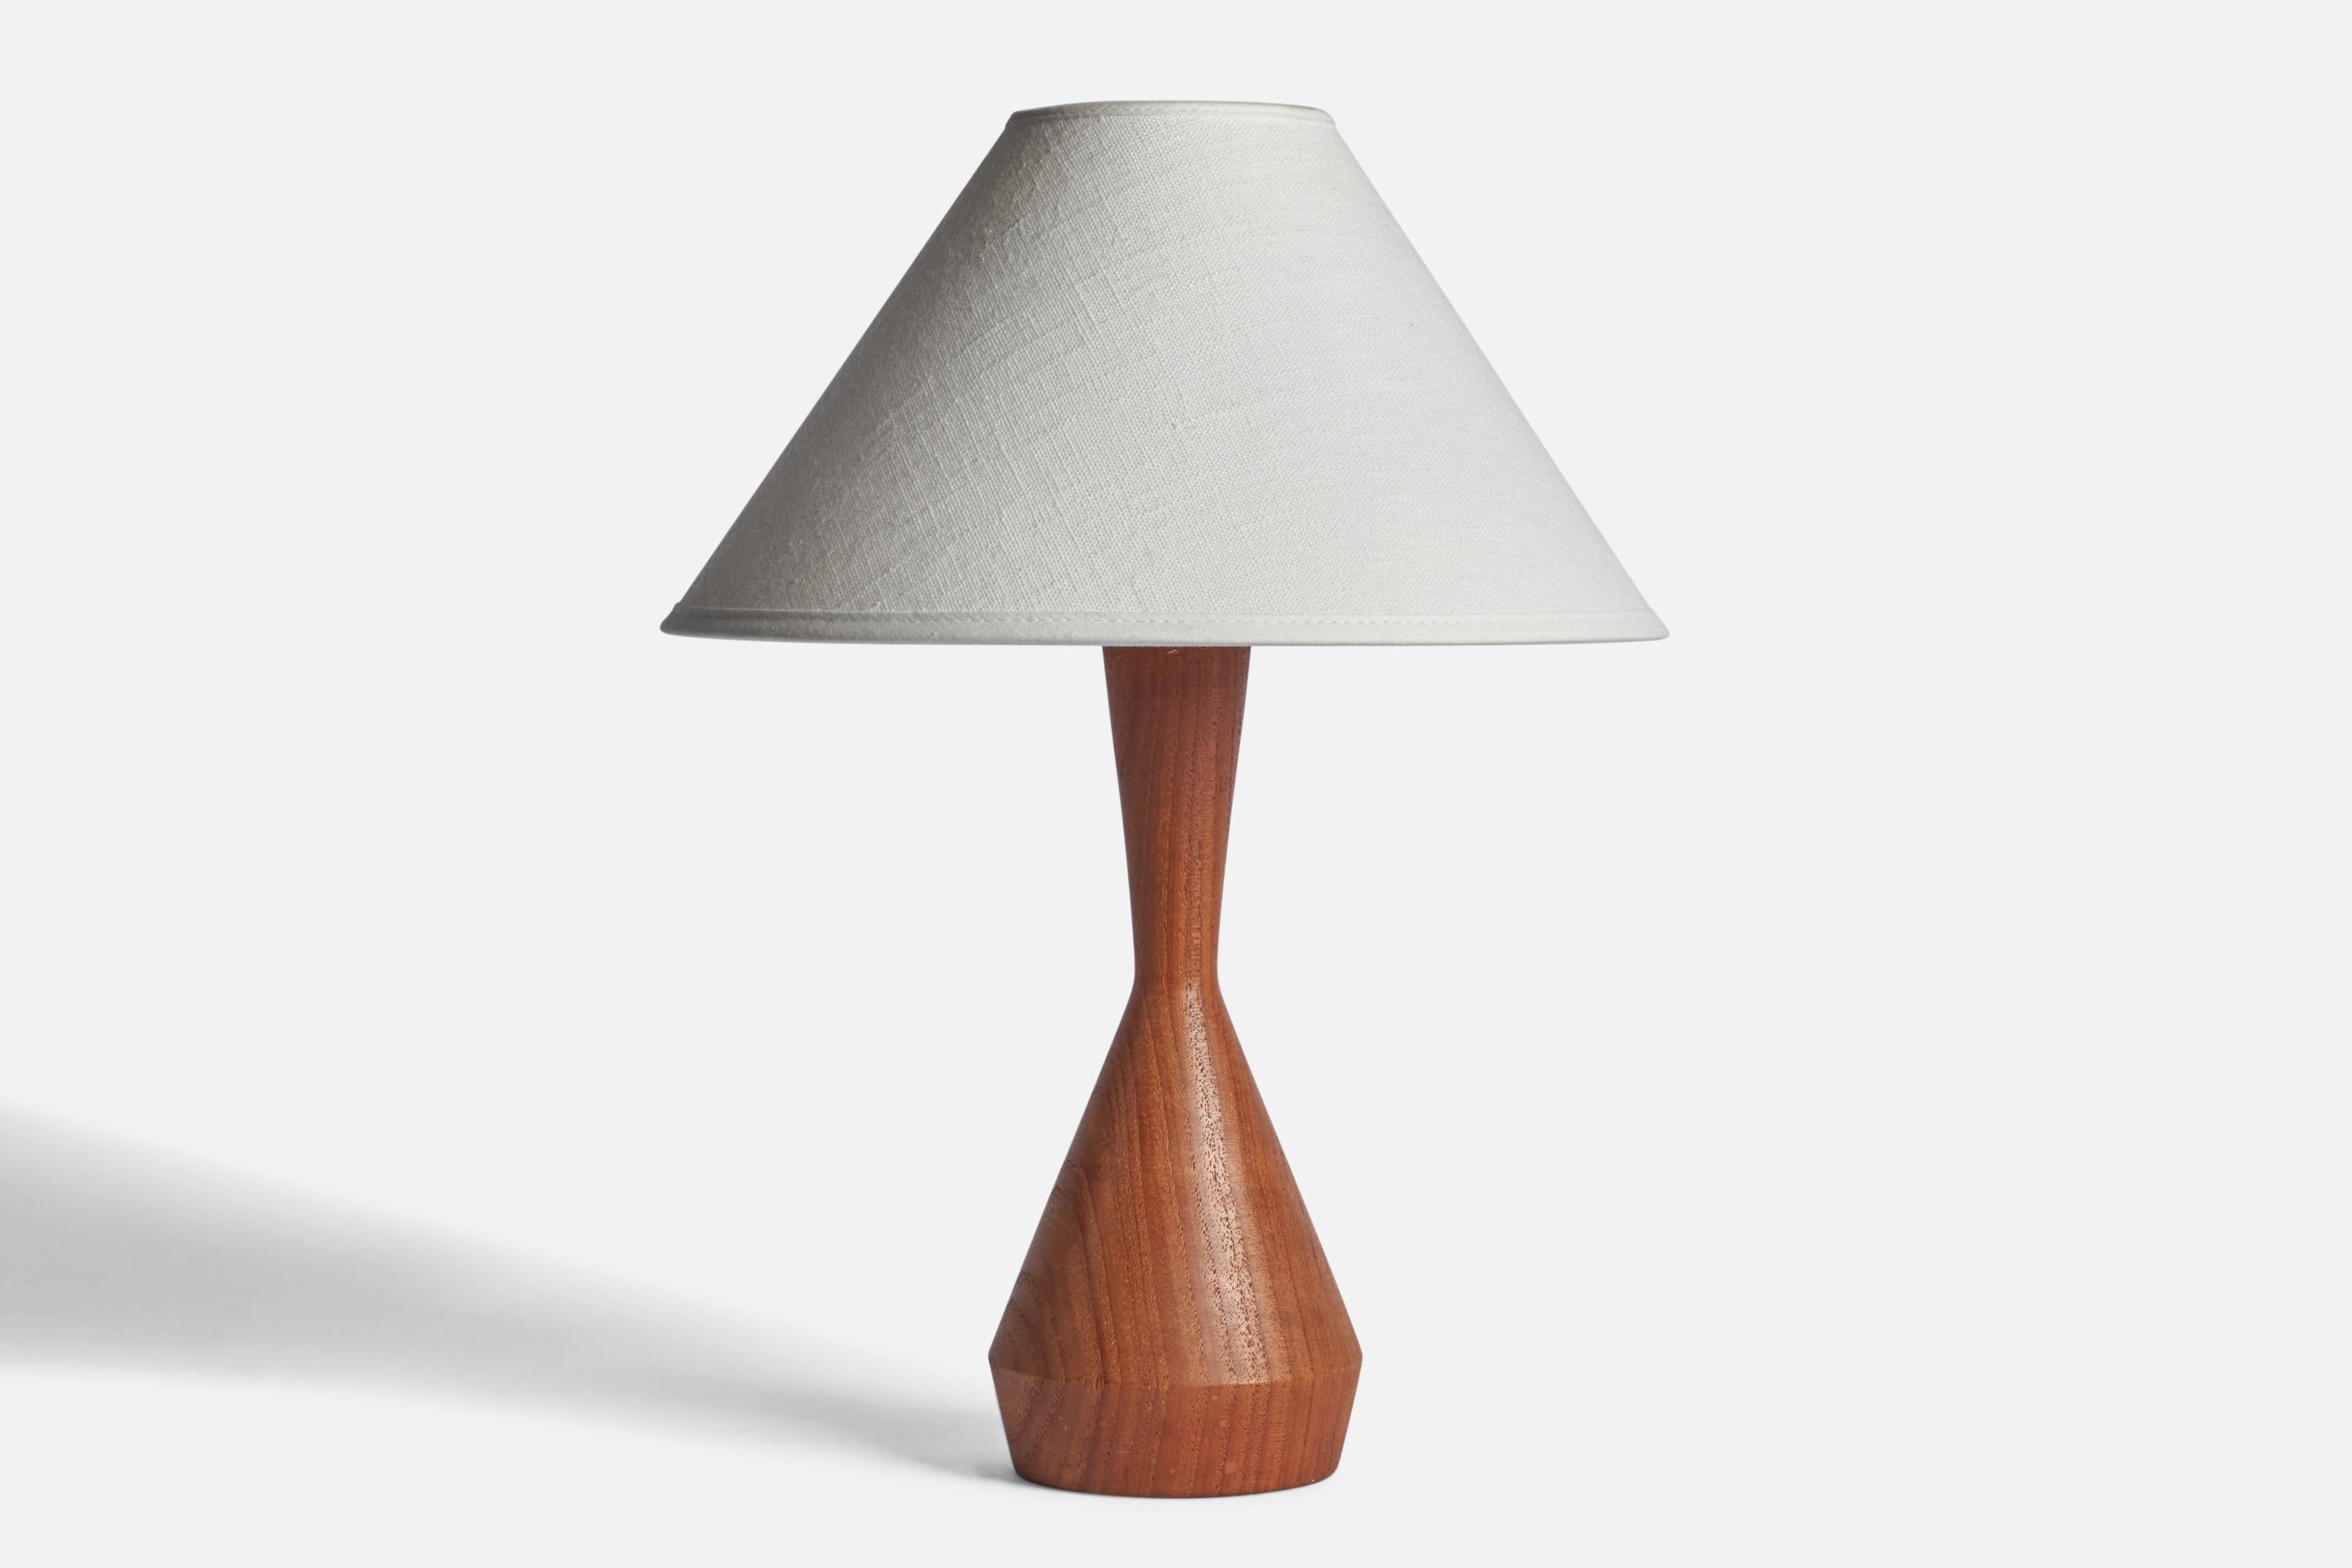 A teak table lamp designed and produced in Sweden, 1950s.

Dimensions of Lamp (inches): 10.75” H x 4” Diameter
Dimensions of Shade (inches): 2.5” Top Diameter x 10” Bottom Diameter x 5.5